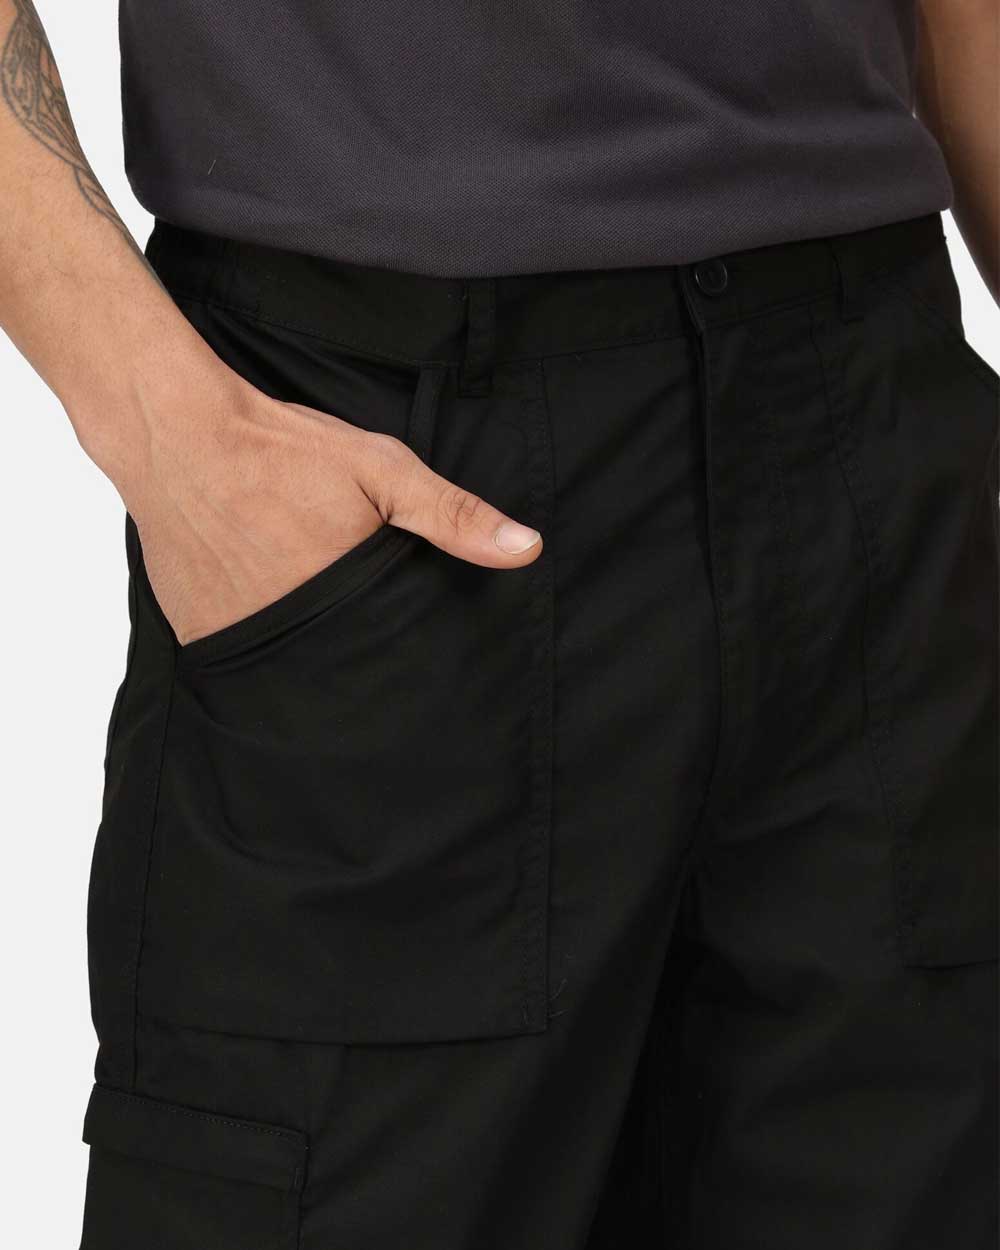 Regatta Lined Action Trousers in Black 